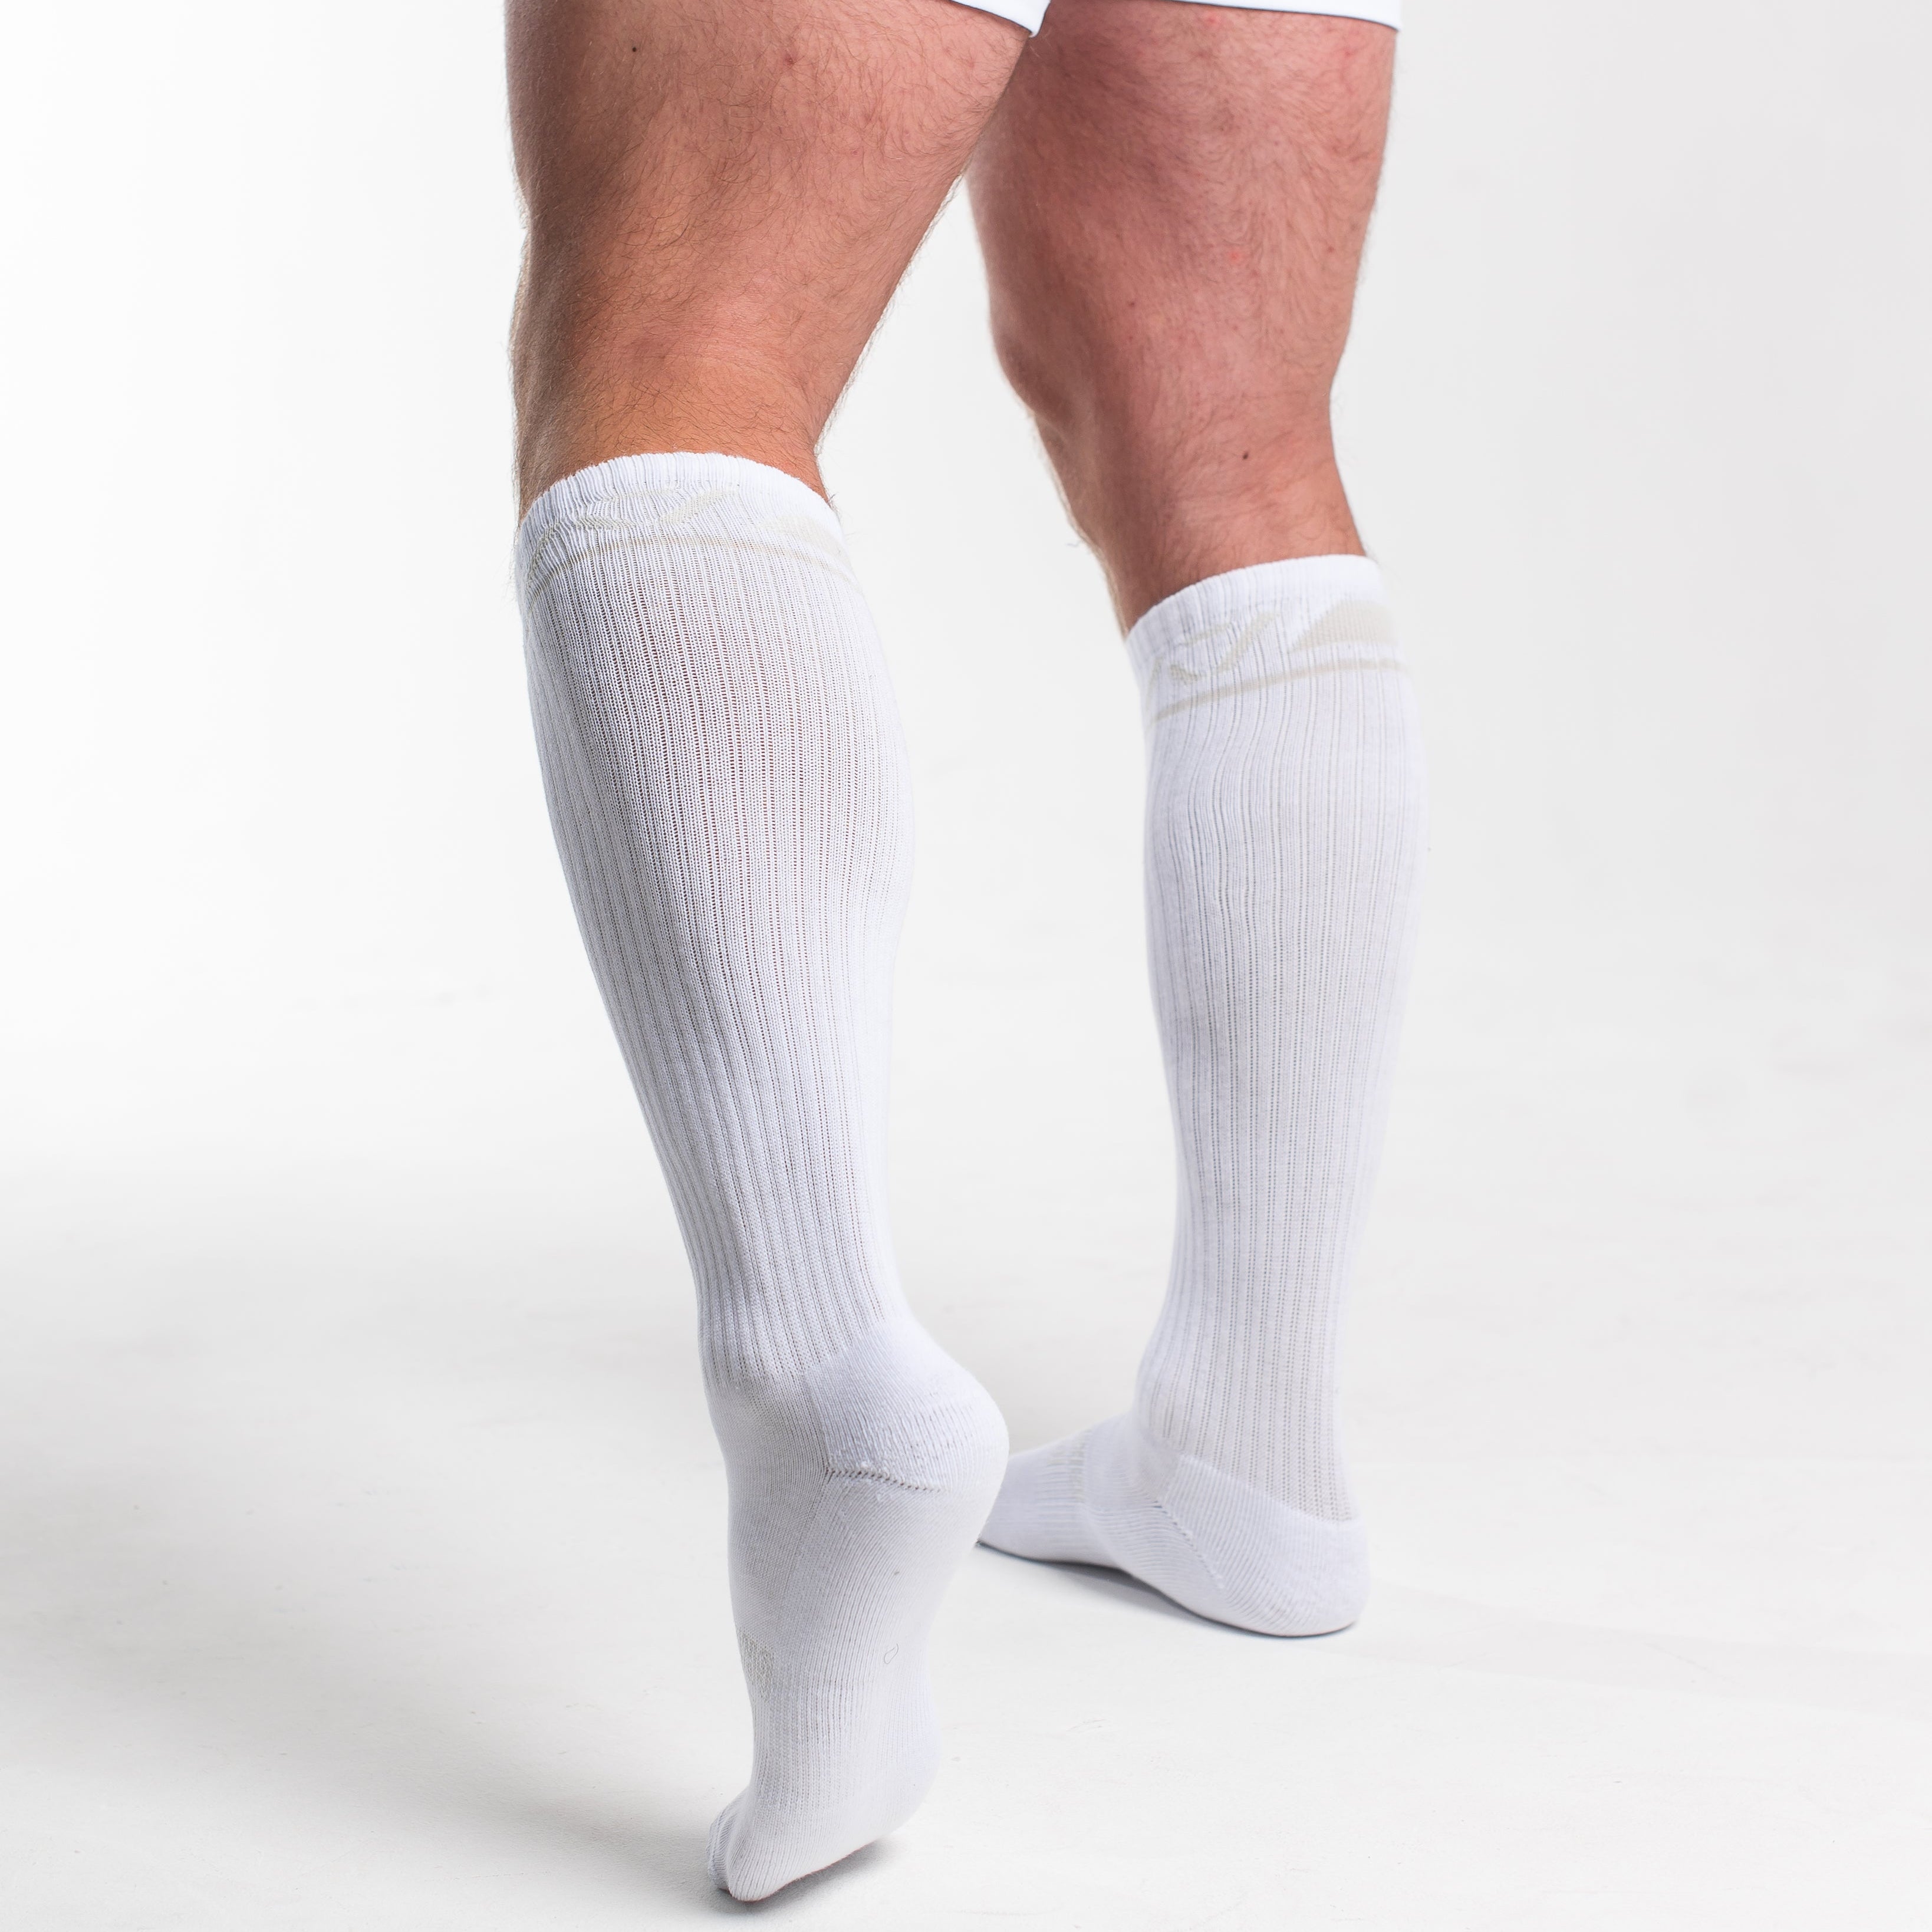 A7 Polar deadlift socks are designed specifically for pulls and keep your shins protected from scrapes. A7 deadlift socks are a perfect pair to wear in training or powerlifting competition. The A7 IPF Approved Kit includes Powerlifting Singlet, A7 Meet Shirt, A7 Zebra Wrist Wraps, A7 Deadlift Socks, Hourglass Knee Sleeves (Stiff Knee Sleeves and Rigor Mortis Knee Sleeves). All A7 Powerlifting Equipment shipping to UK, Norway, Switzerland and Iceland.